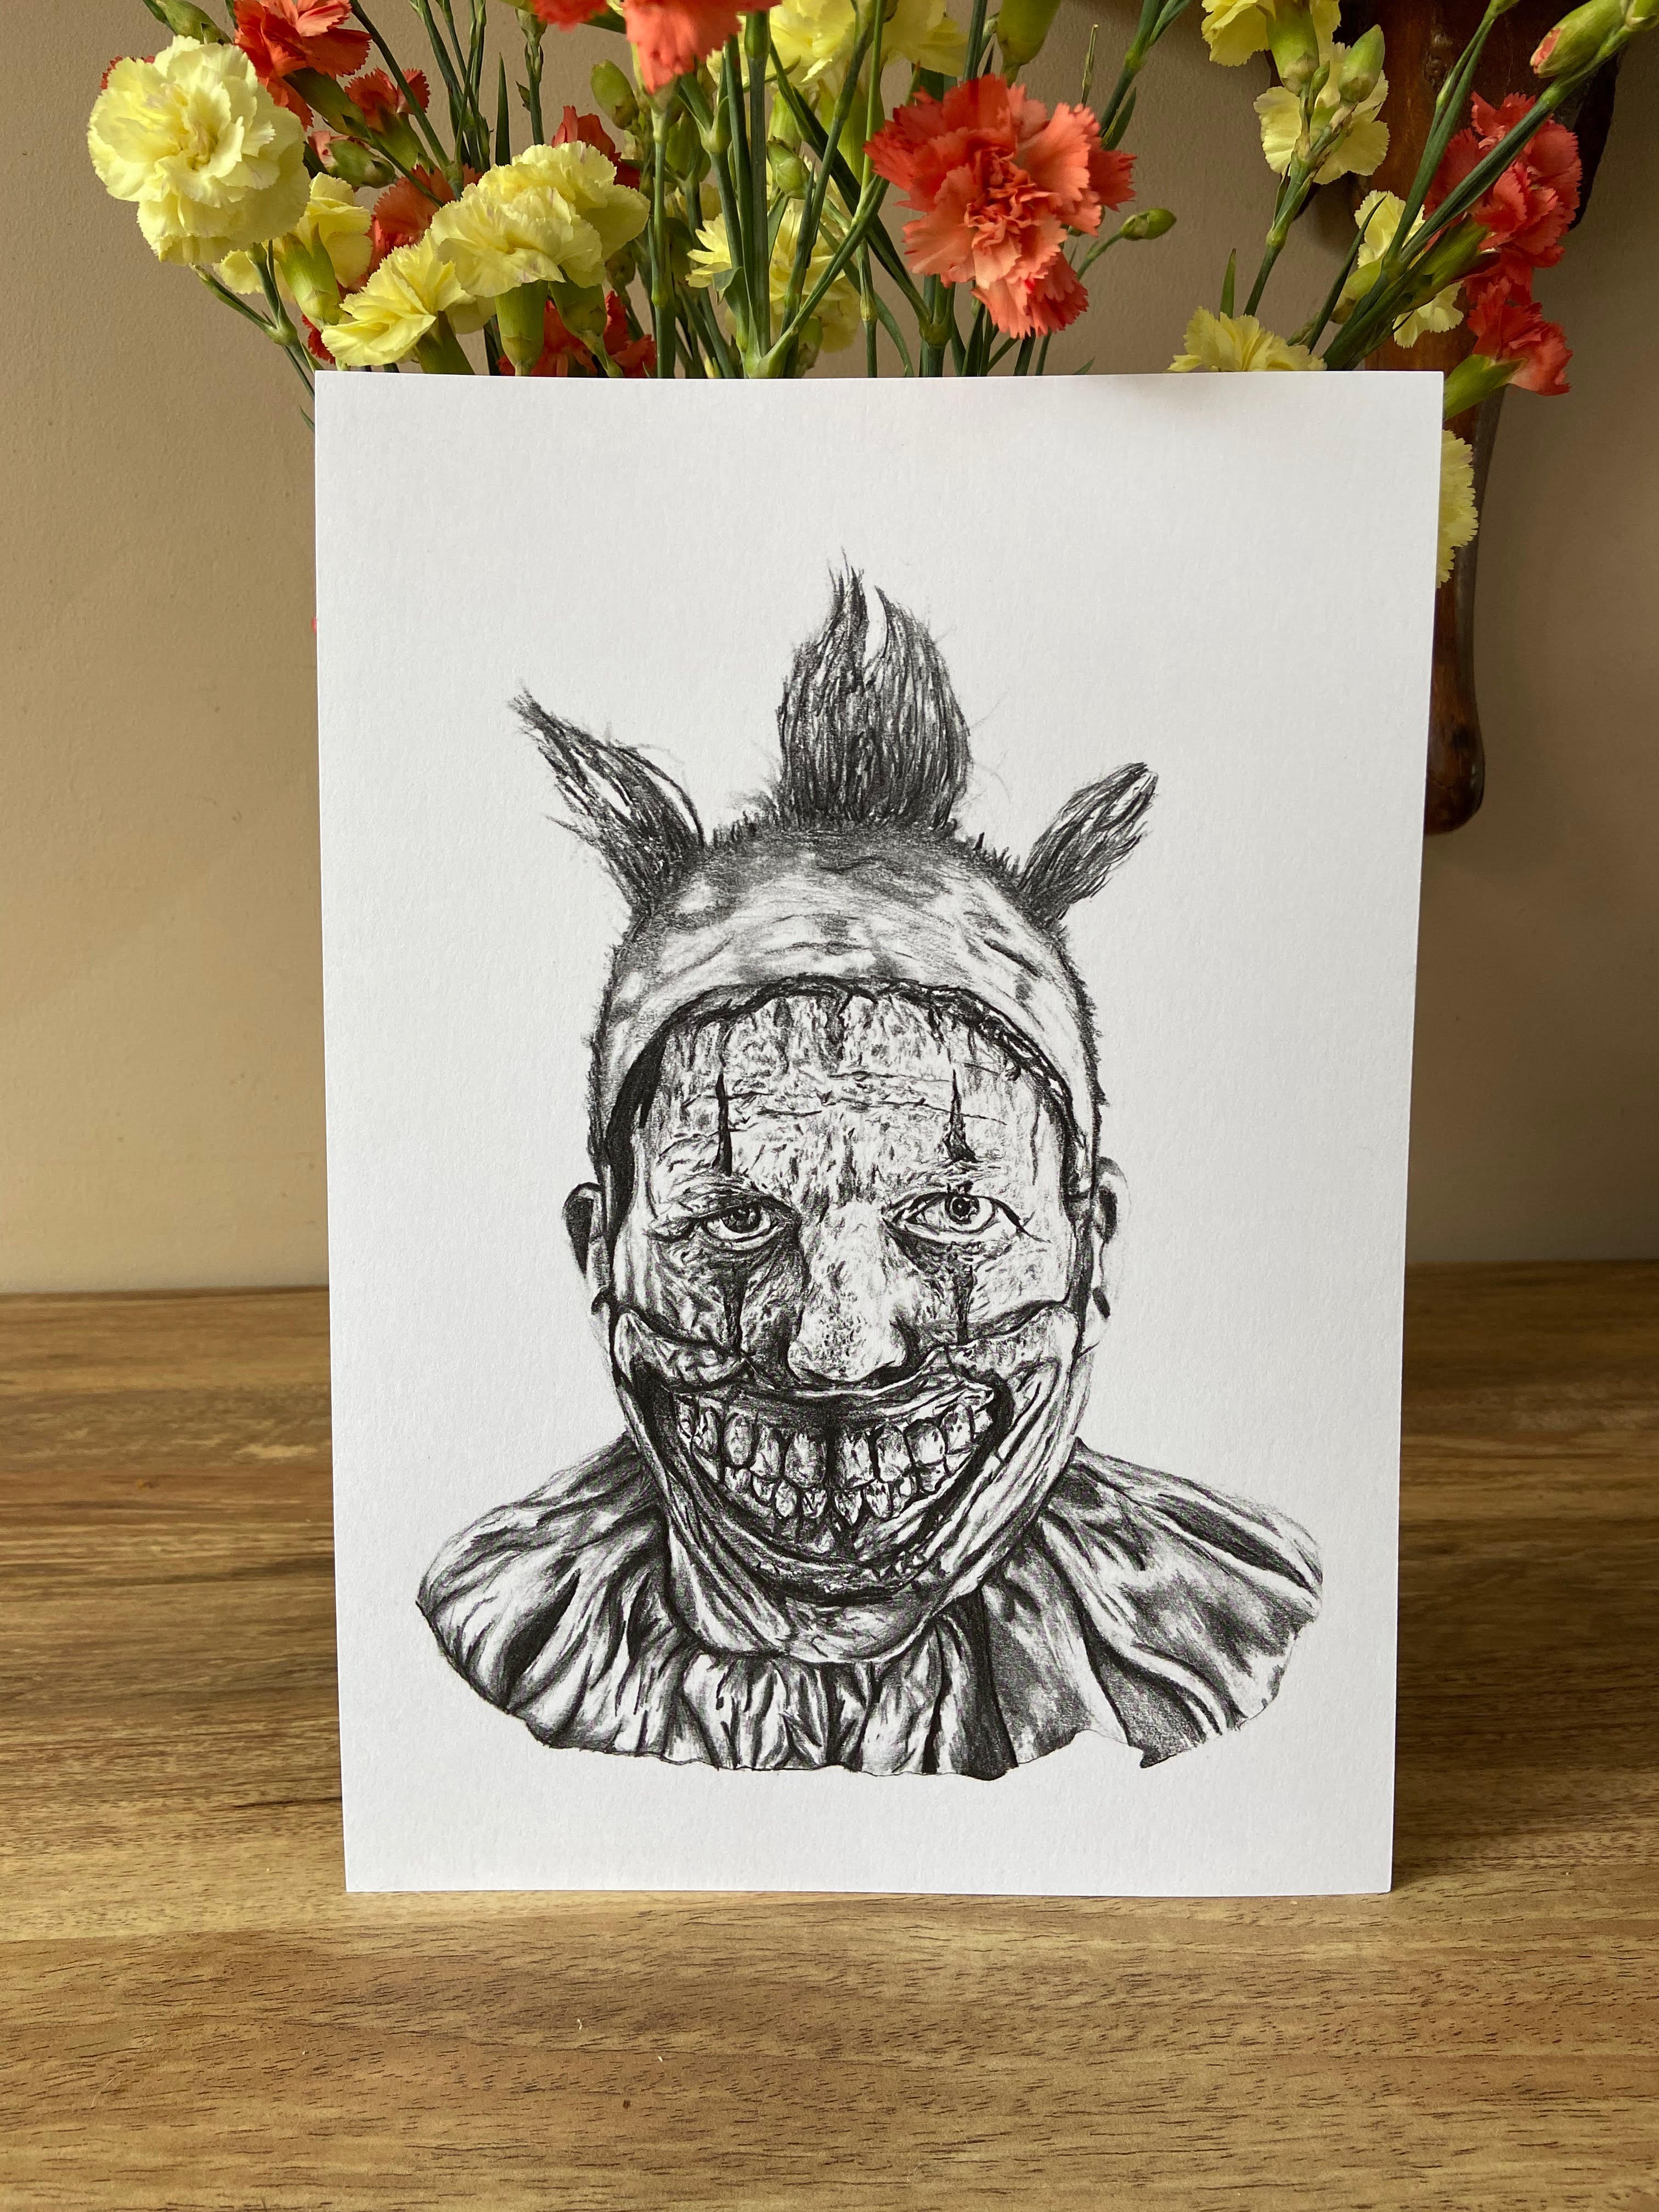 Pencil drawing of Twisty the clown from the TV show American Horror Story